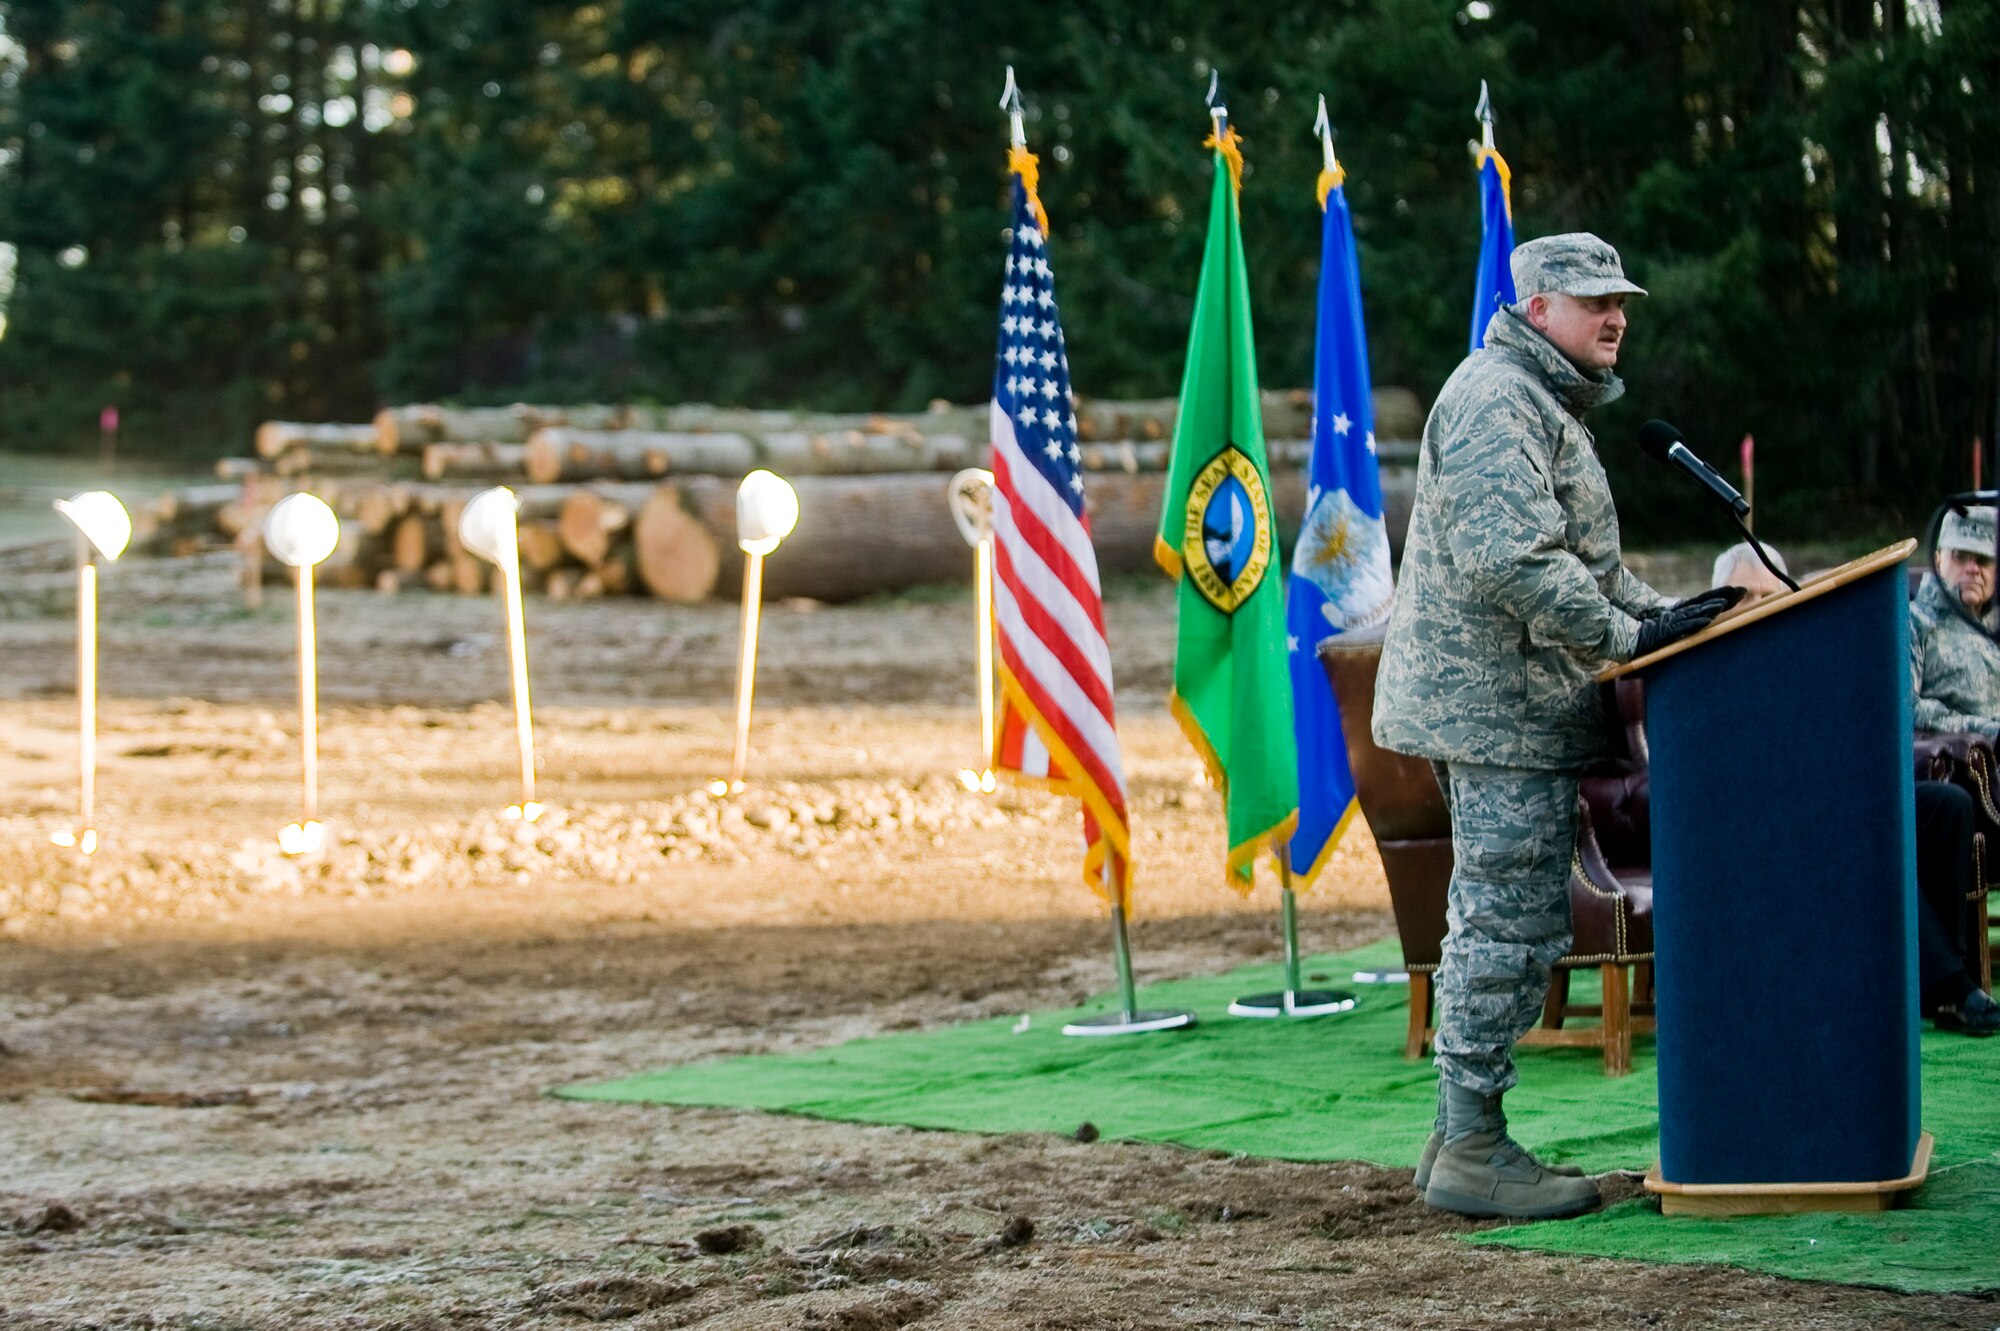 Maj. Gen. Timothy Lowenberg, adjutant general and commander of the Washington National Guard, speaks during a ground breaking ceremony for a new 23,500-square foot facility for the 262nd Network Warfare Squadron Dec. 11. The $5.6 million construction project is scheduled for completion in October 2010. The mission of the 262nd NWS is to train citizen Airmen to provide network warfare capabilities to secure defense information networks and provide full-spectrum cyberspace options to the State of Washington, Air Force Space Command and 24th Air Force. The 262nd NWS is part of the 688th Information Operations Wing at Lackland Air Force Base, Texas.(U.S. Air Force photo/Abner Guzman)

